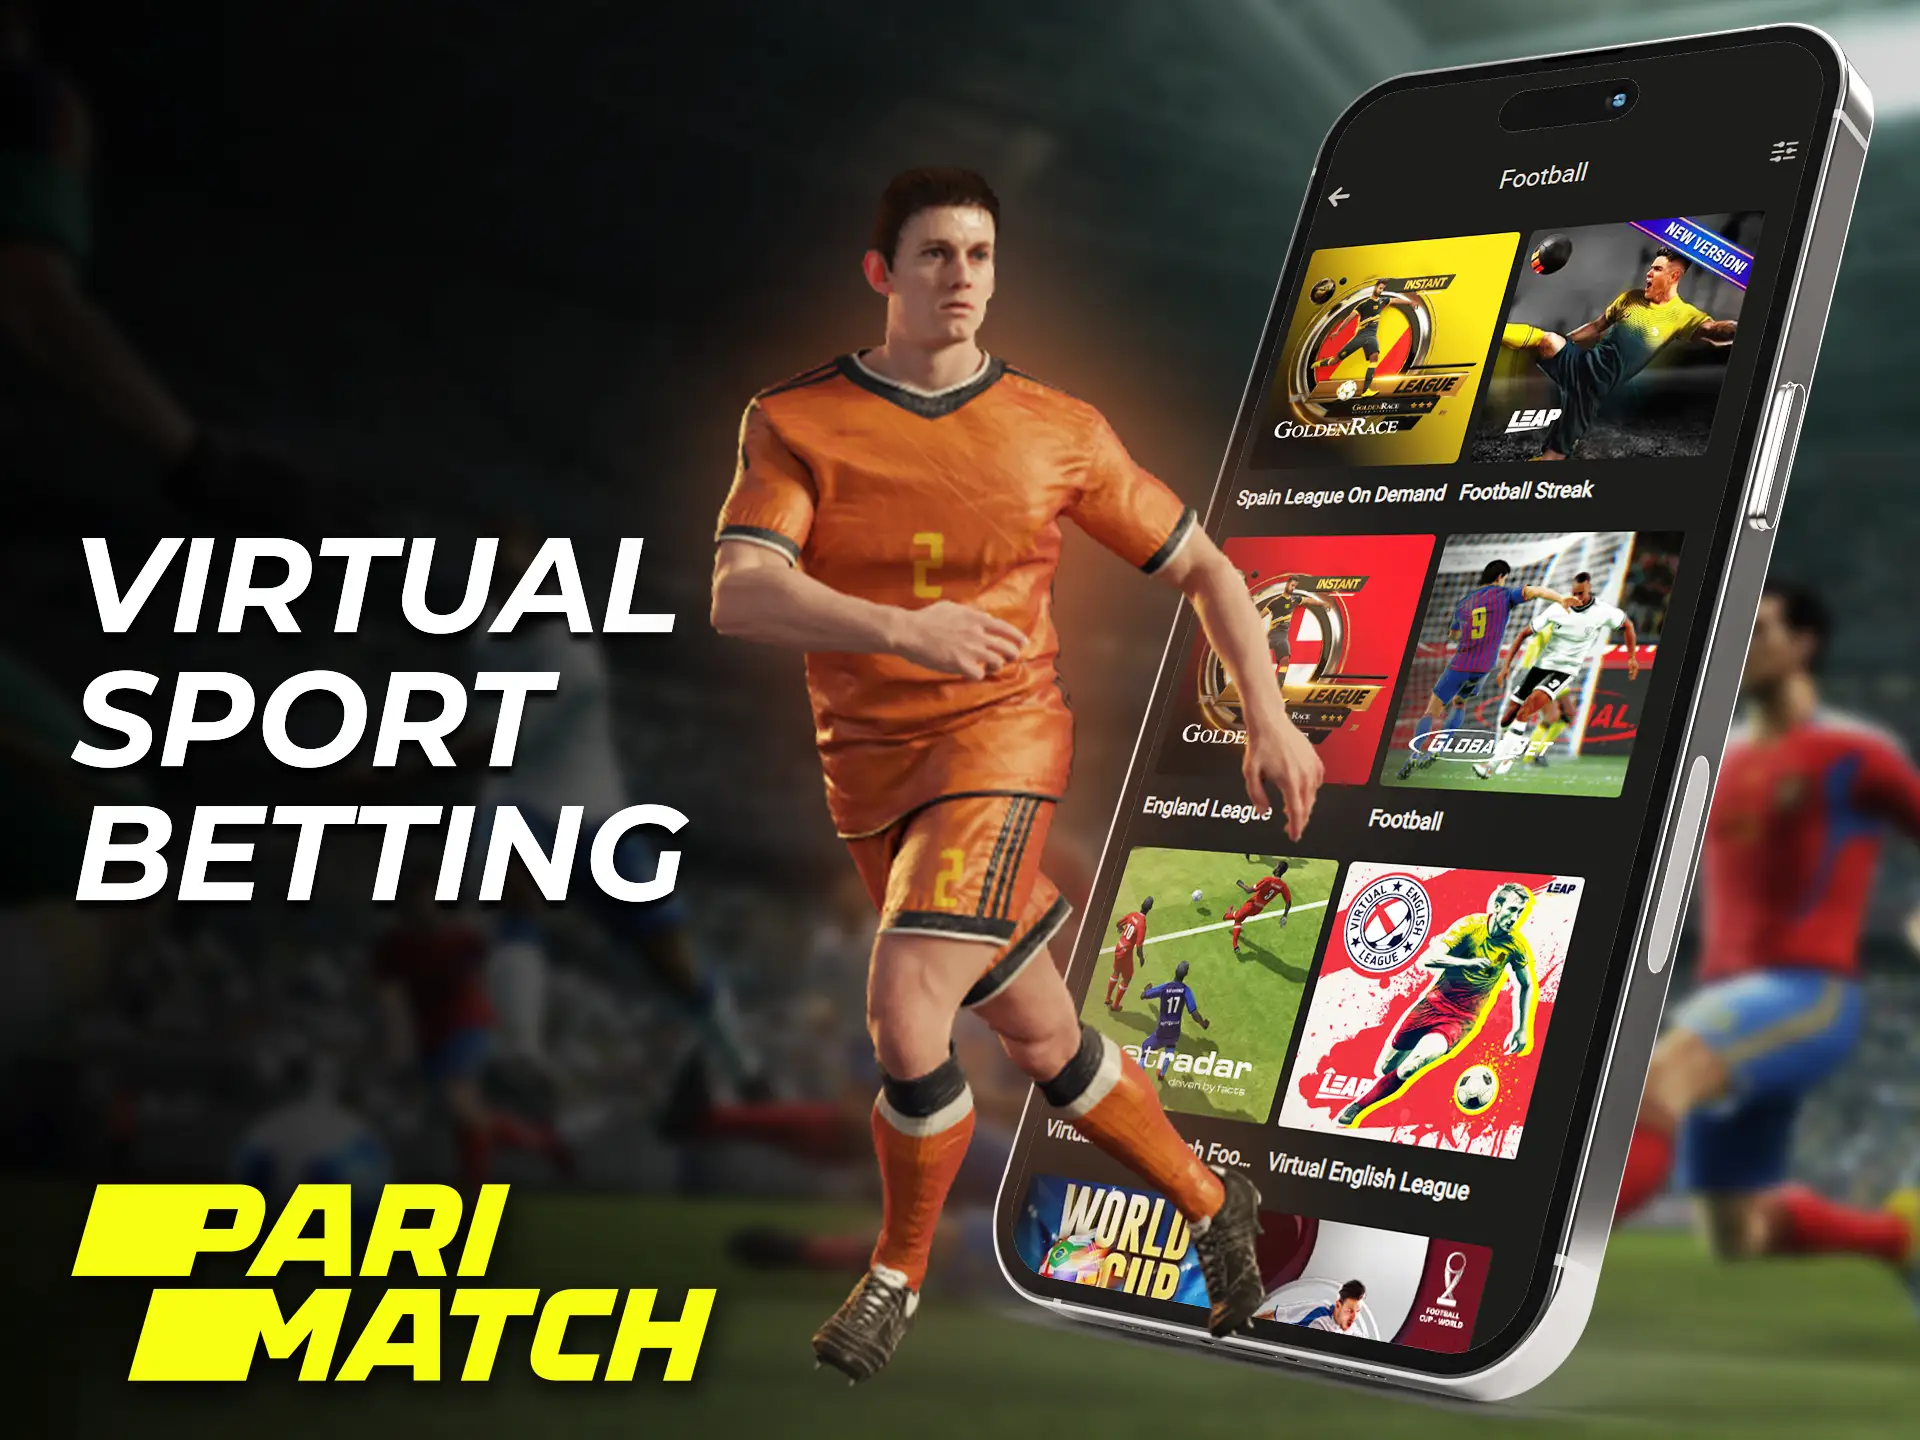 Bet on virtual sports with less risk in the Parimatch app.